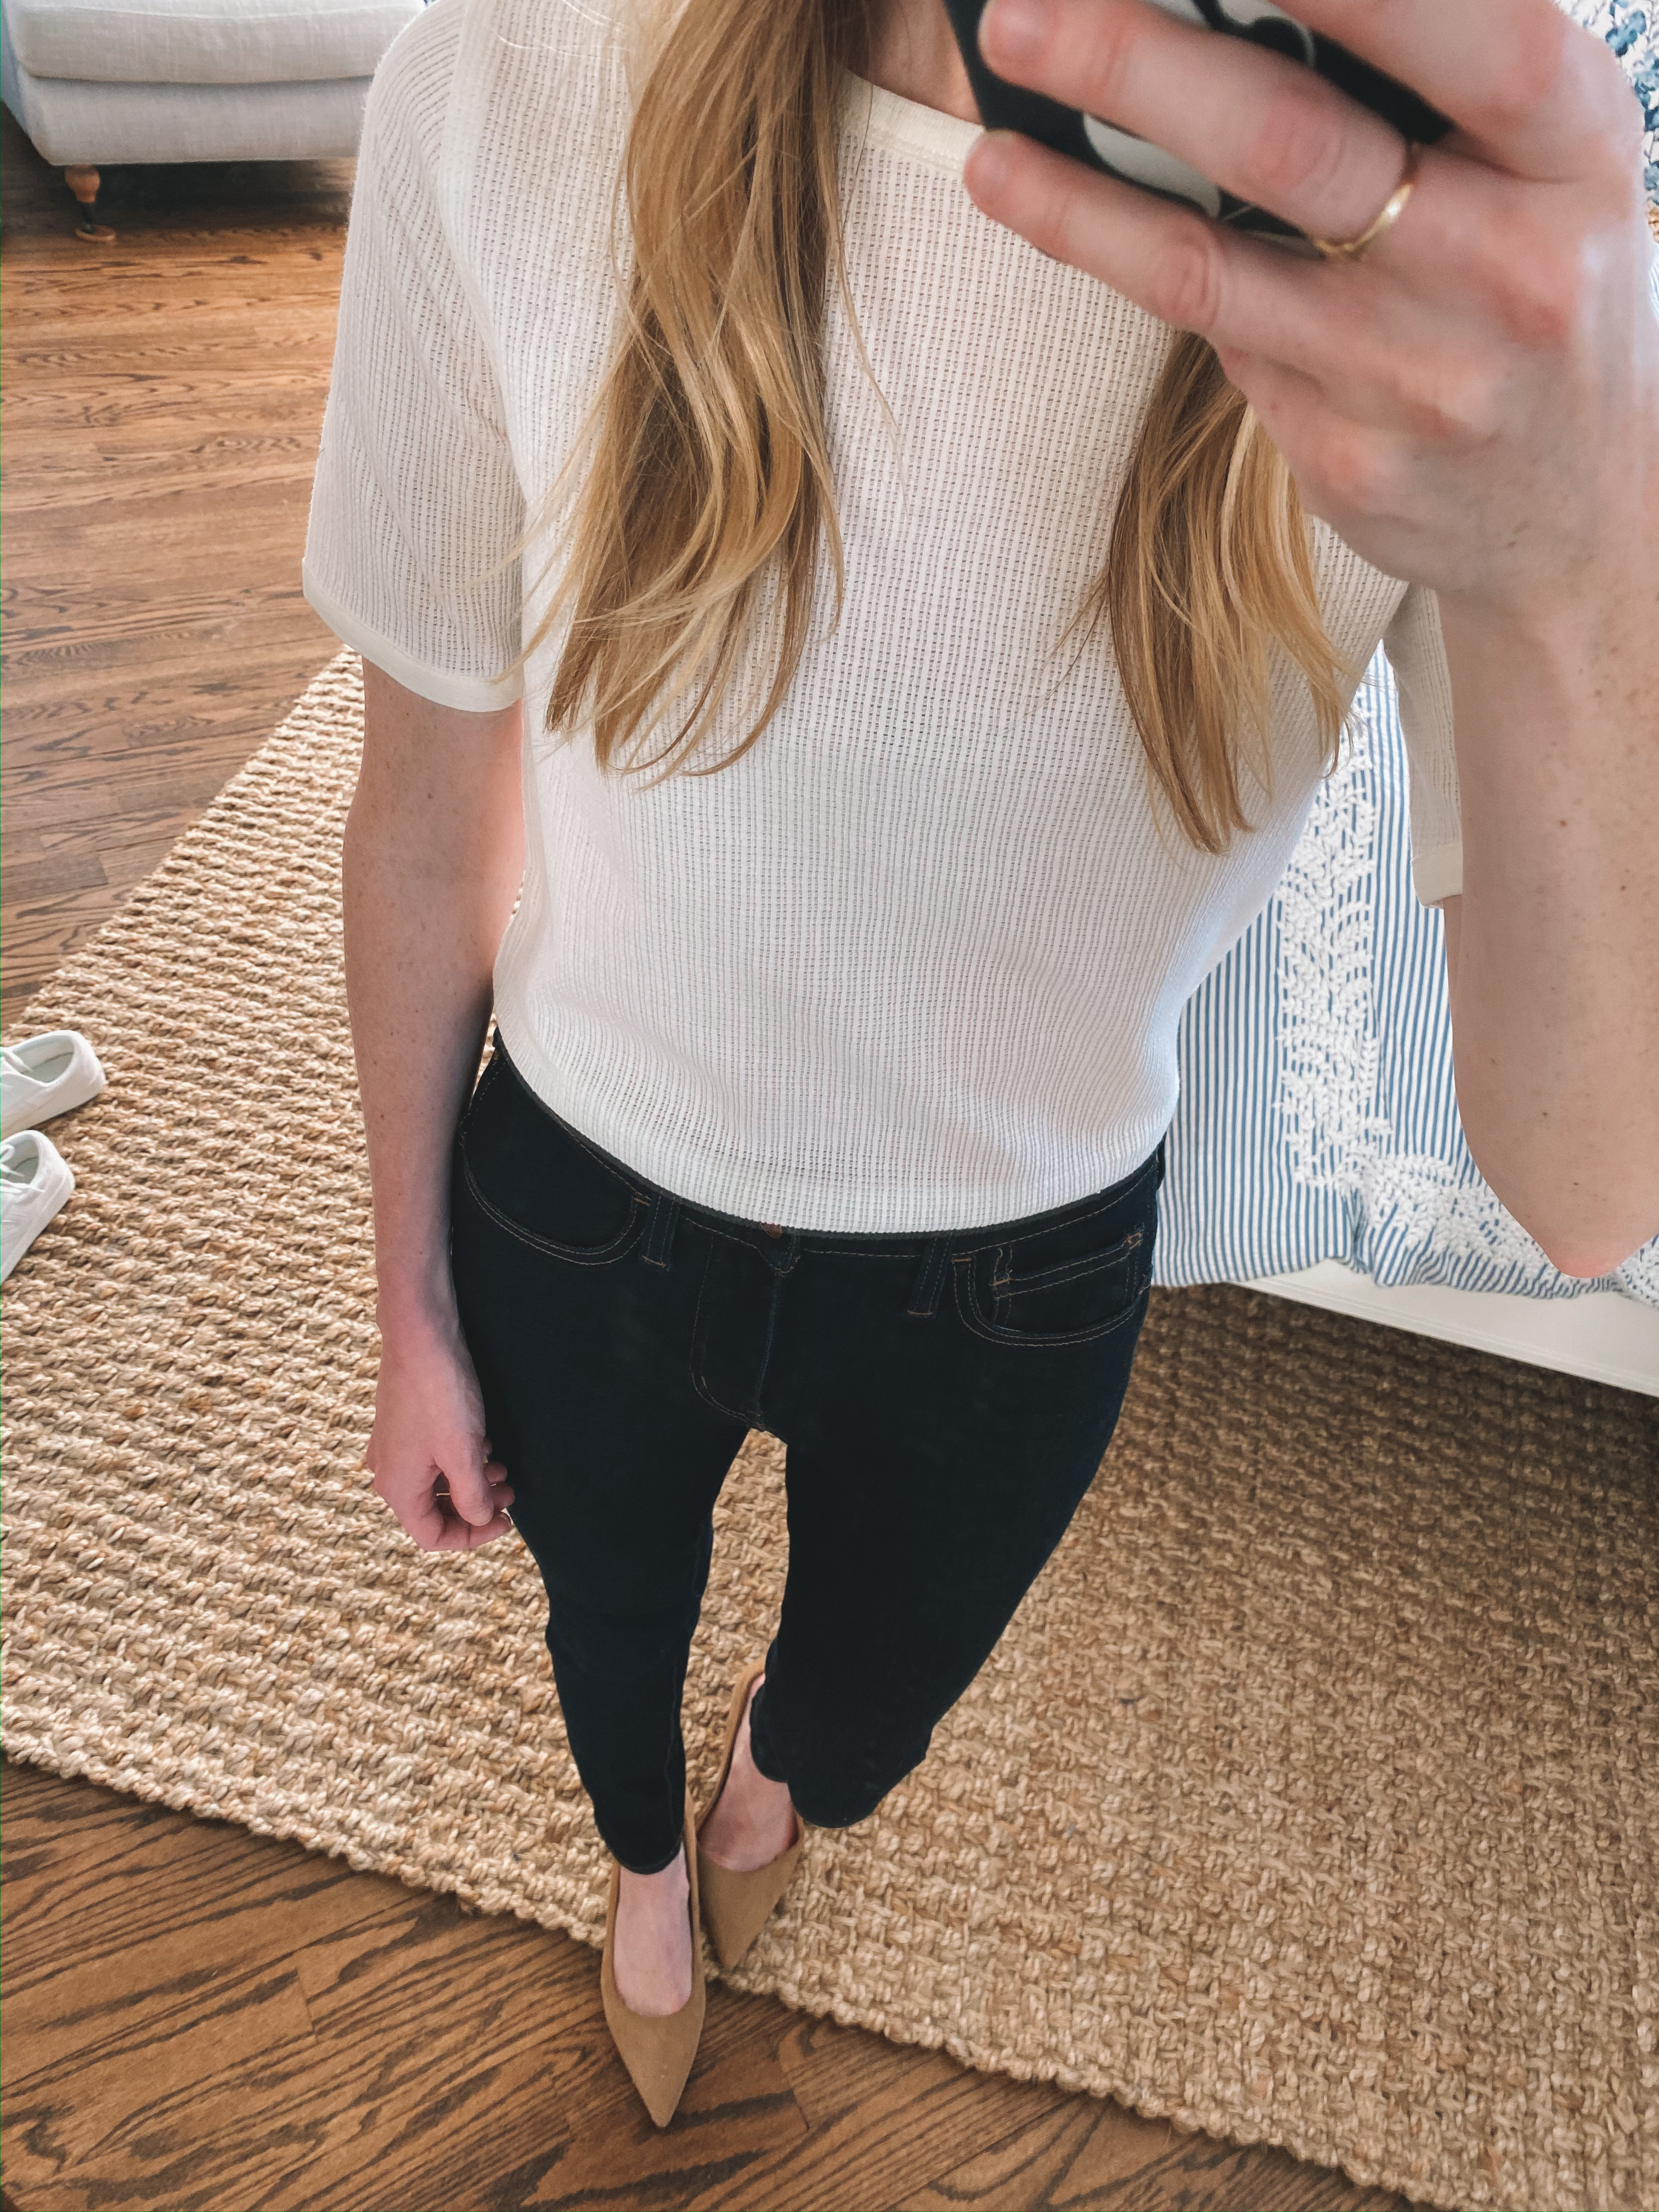 Madewell Roadtripper Jeans - Kelly in the City